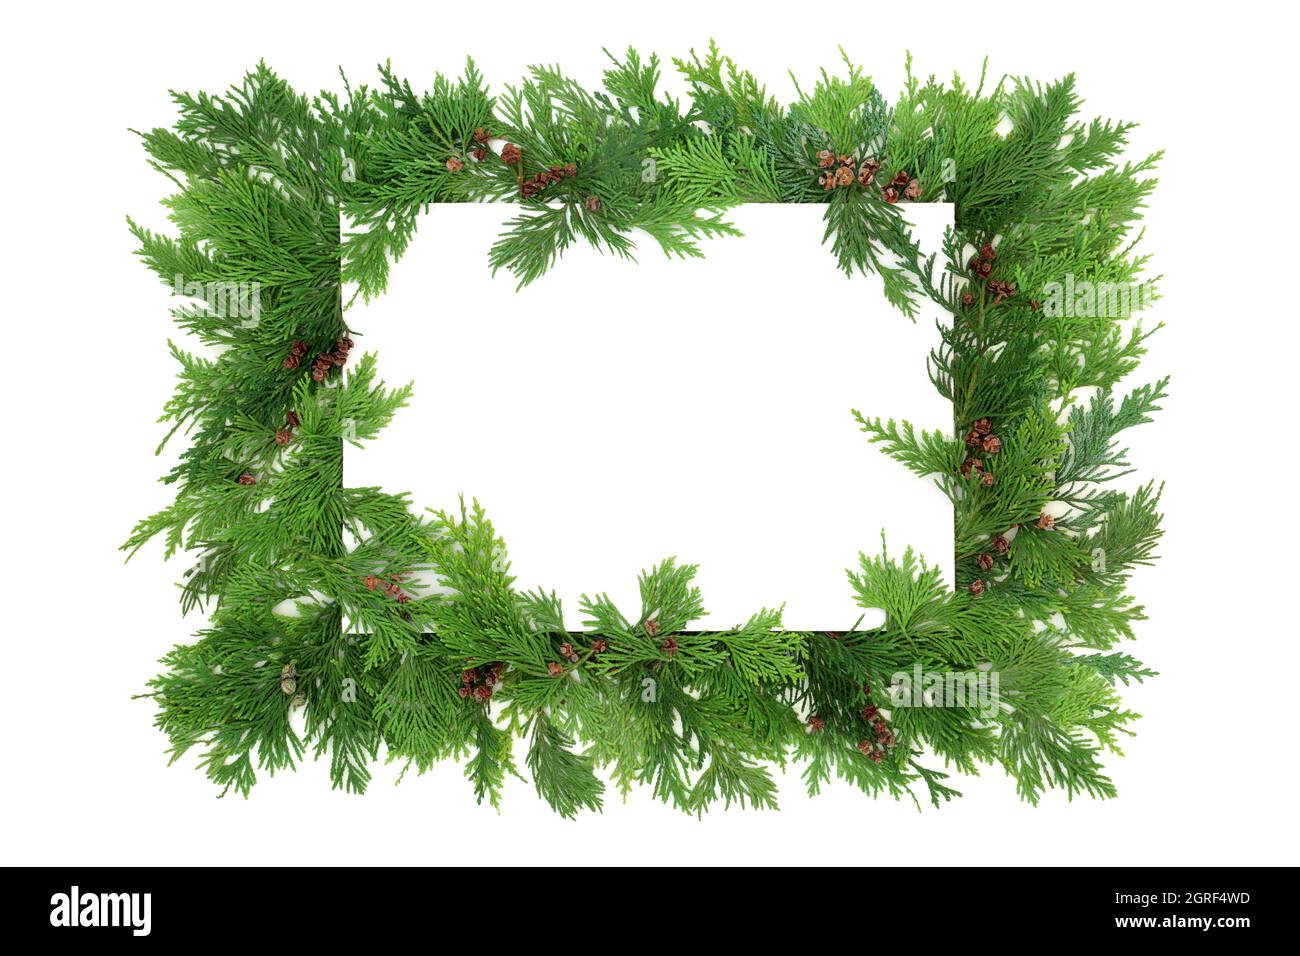 Cedar cypress leaf background border on white. Natural eco friendly composition design element. Flat lay, top view, copy space. Cupressus. Stock Photo